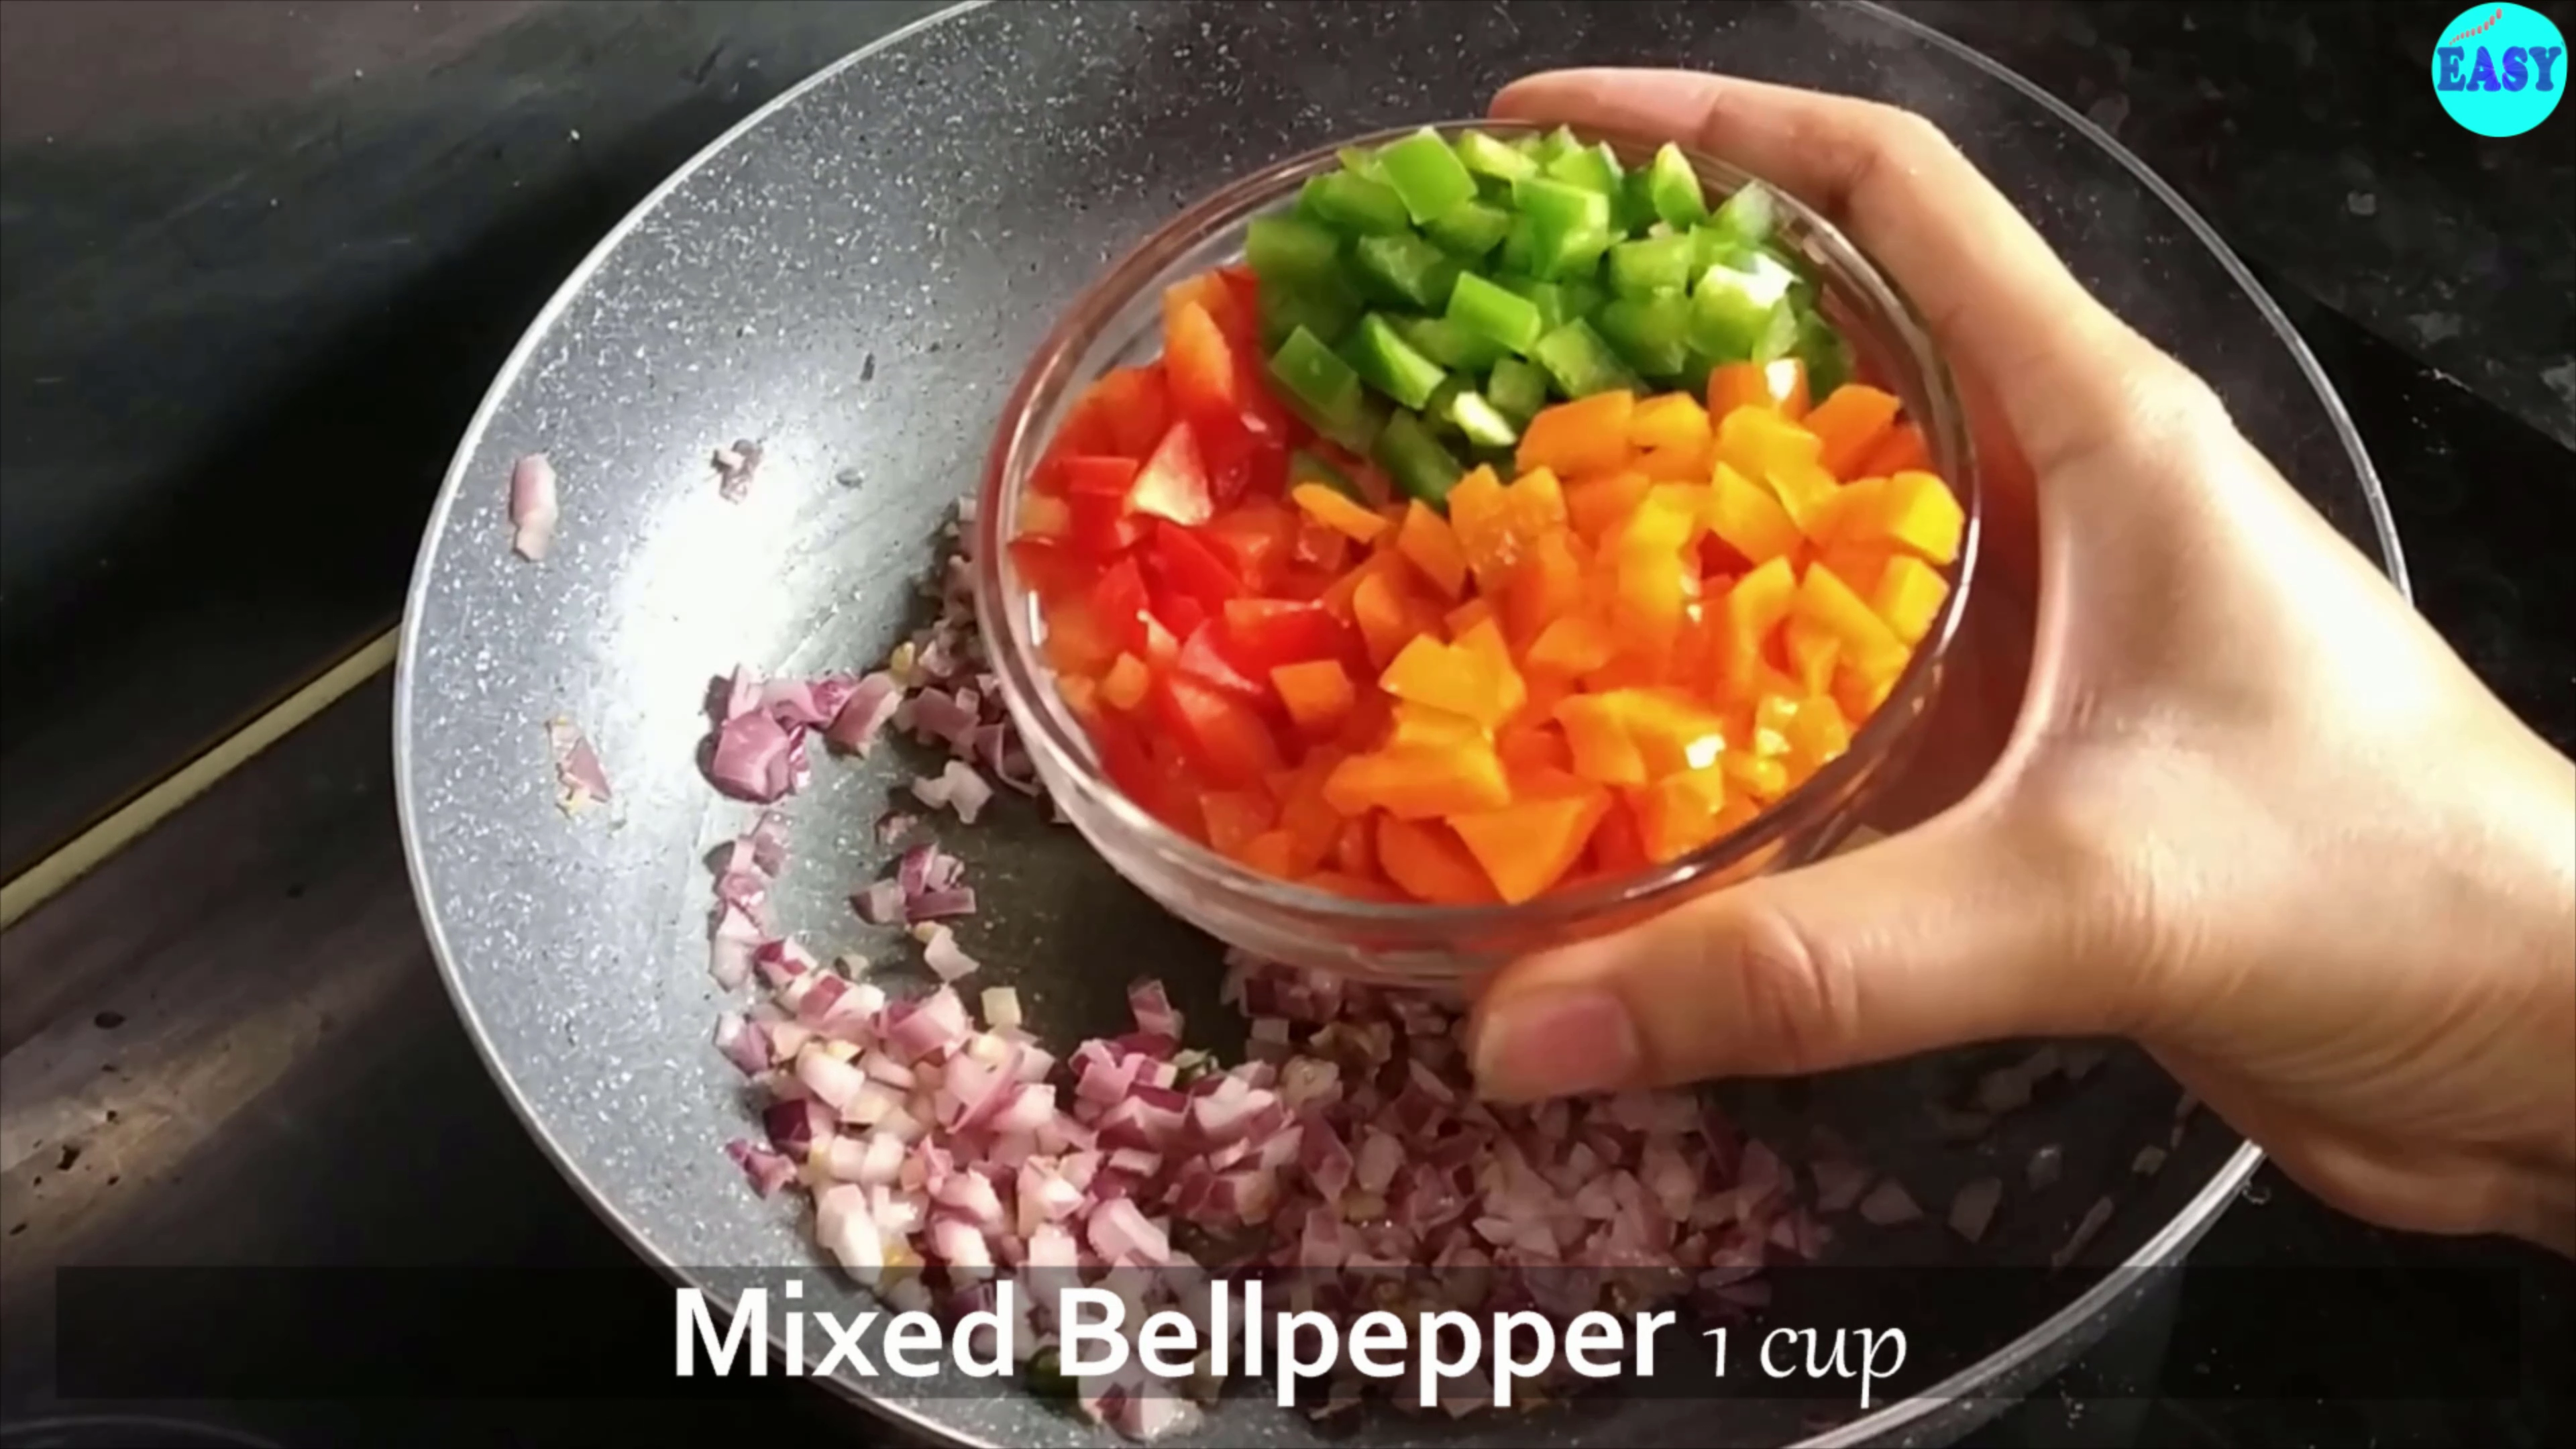 Step 3 - Add bell-peppers 